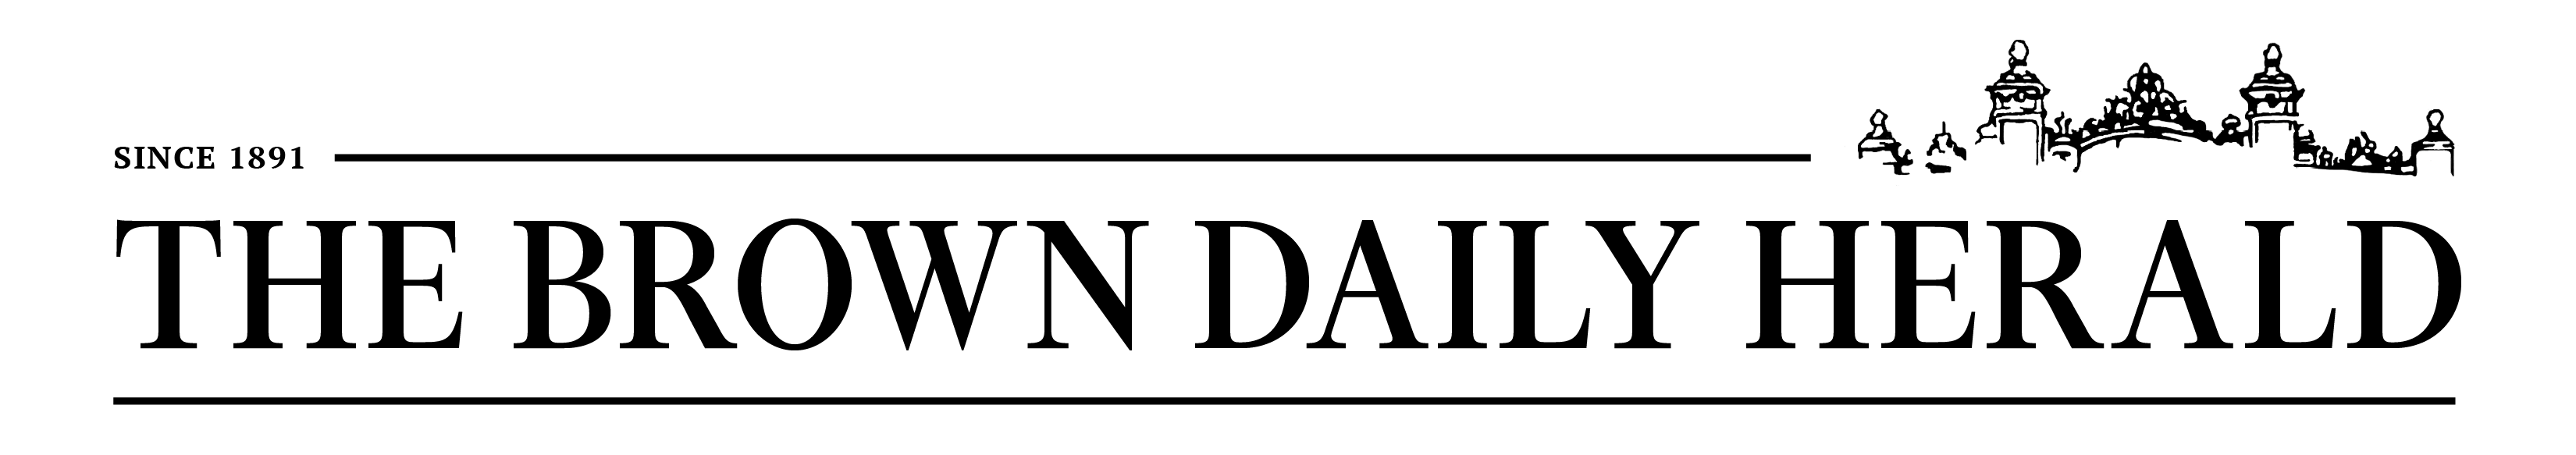 The Bown Daily Herald logo